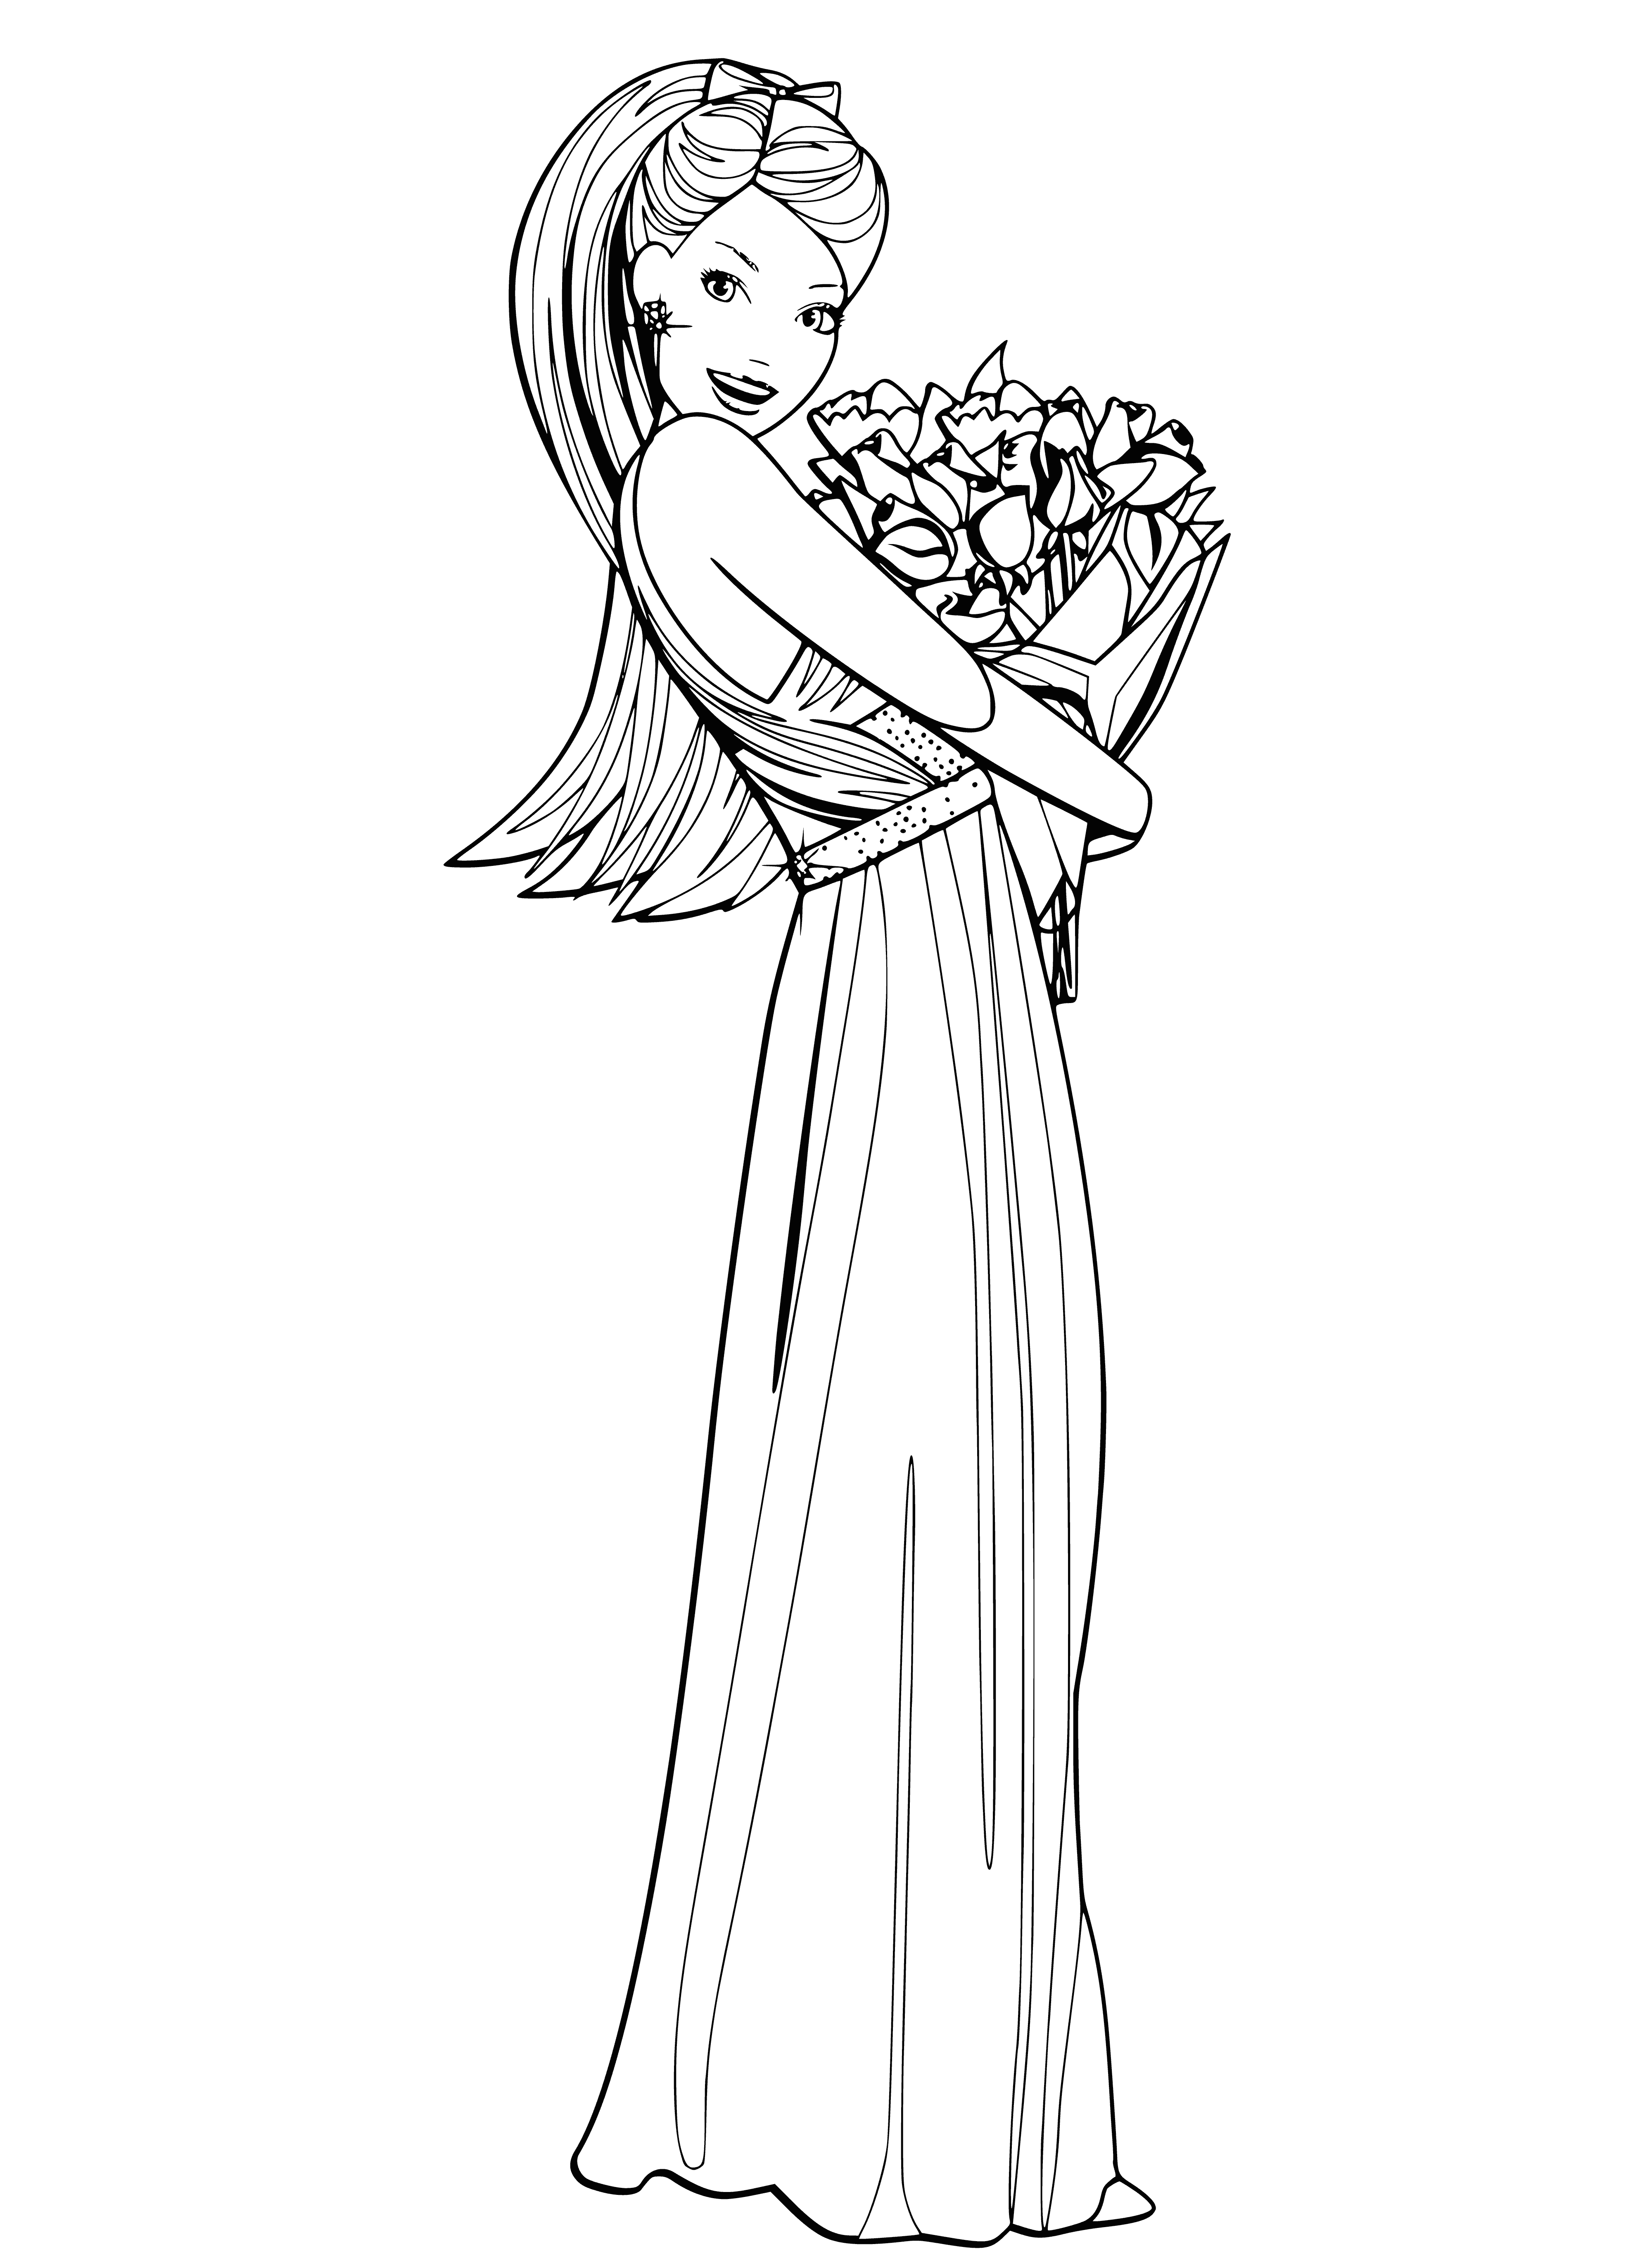 coloring page: Barbie smiles in a pretty pink dress, holding a bouquet of roses. #ShesGotStyle